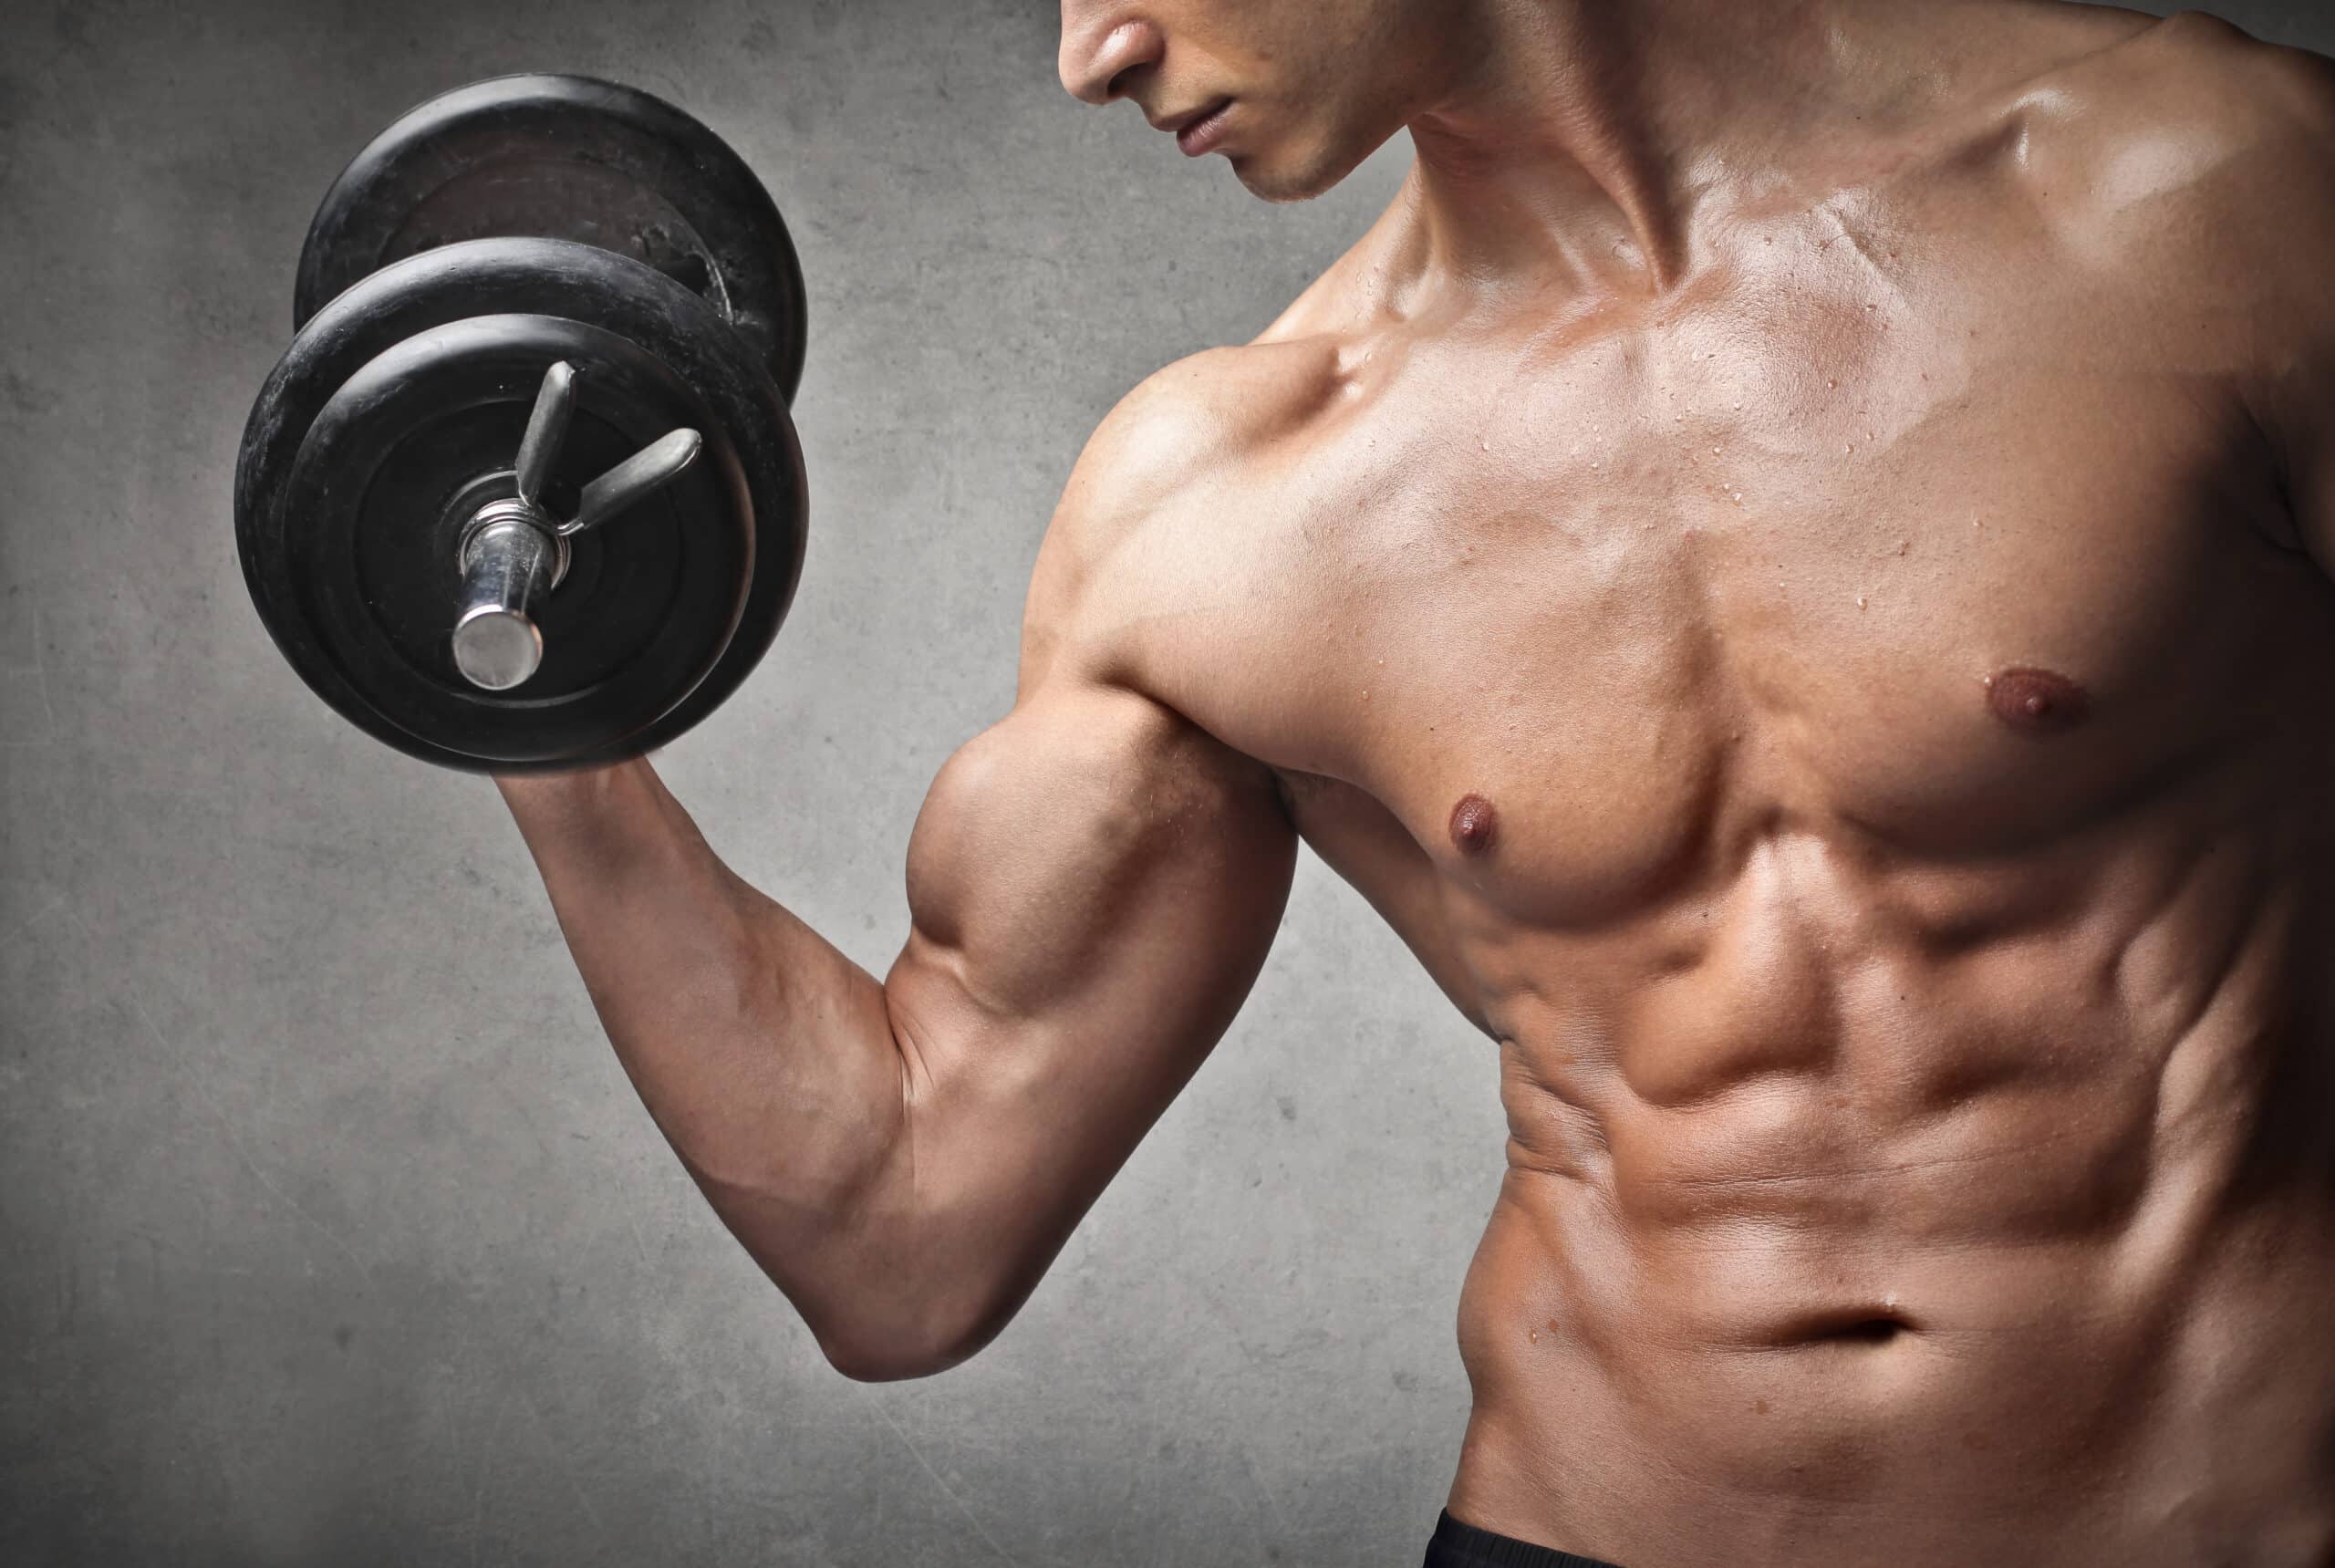 Can You Build Muscle on HRT?